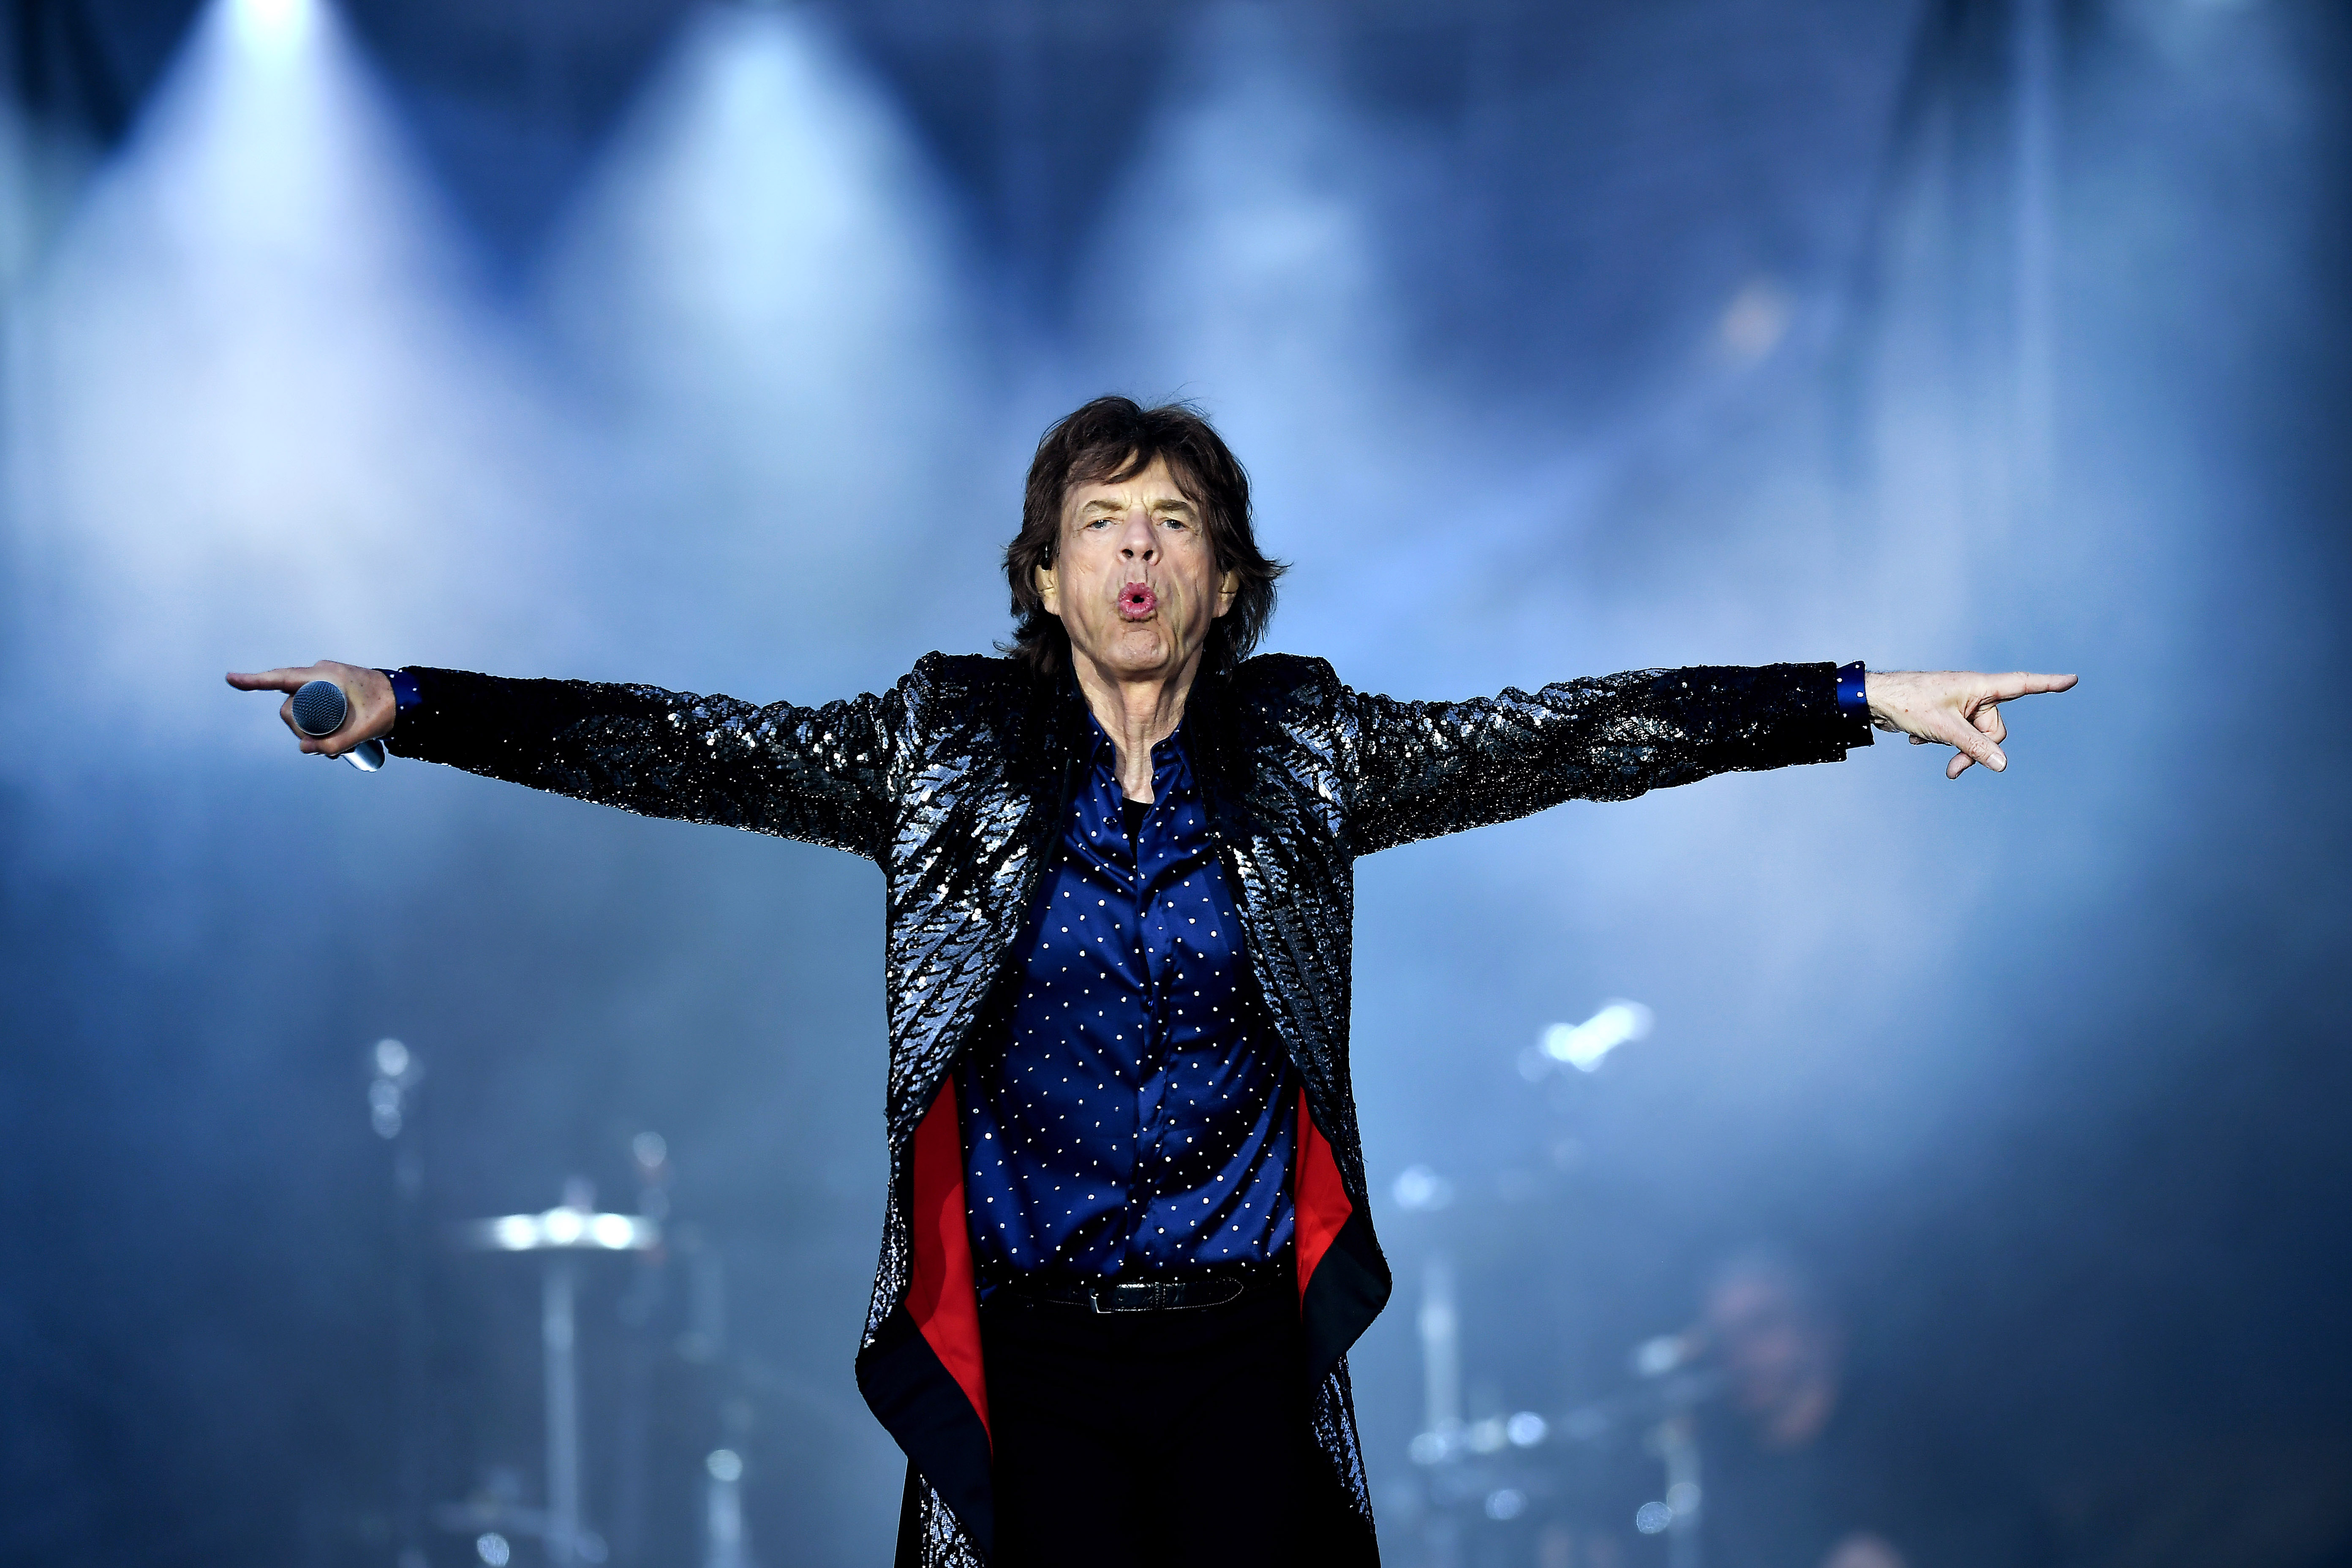 The Rolling Stones ‘No Filter’ Tour Opening Night At Croke Park In Dublin